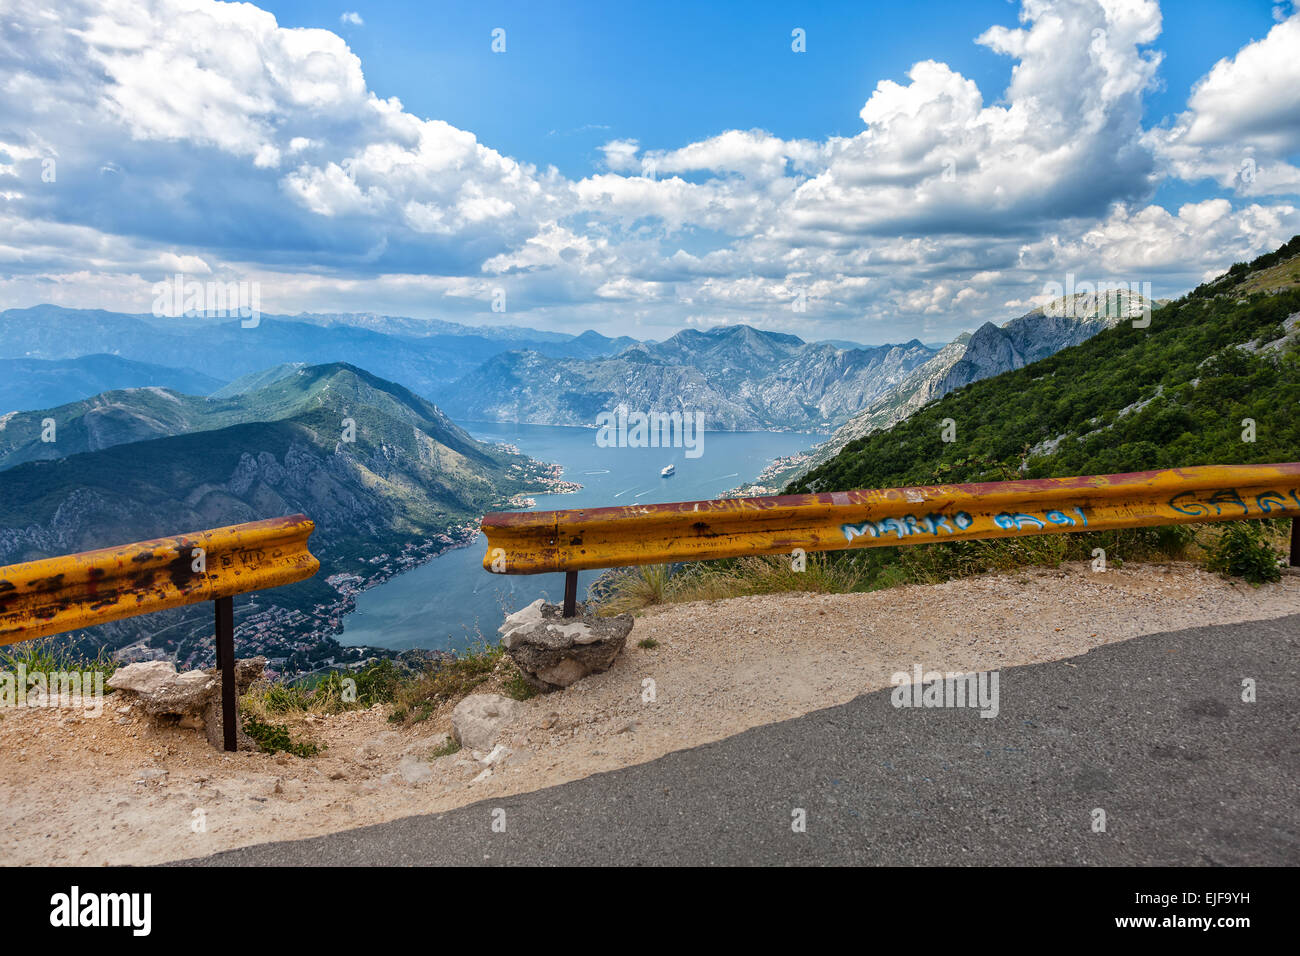 Dangerous mountain road over a precipice in the background Bay of Kotor, Montenegro. Stock Photo